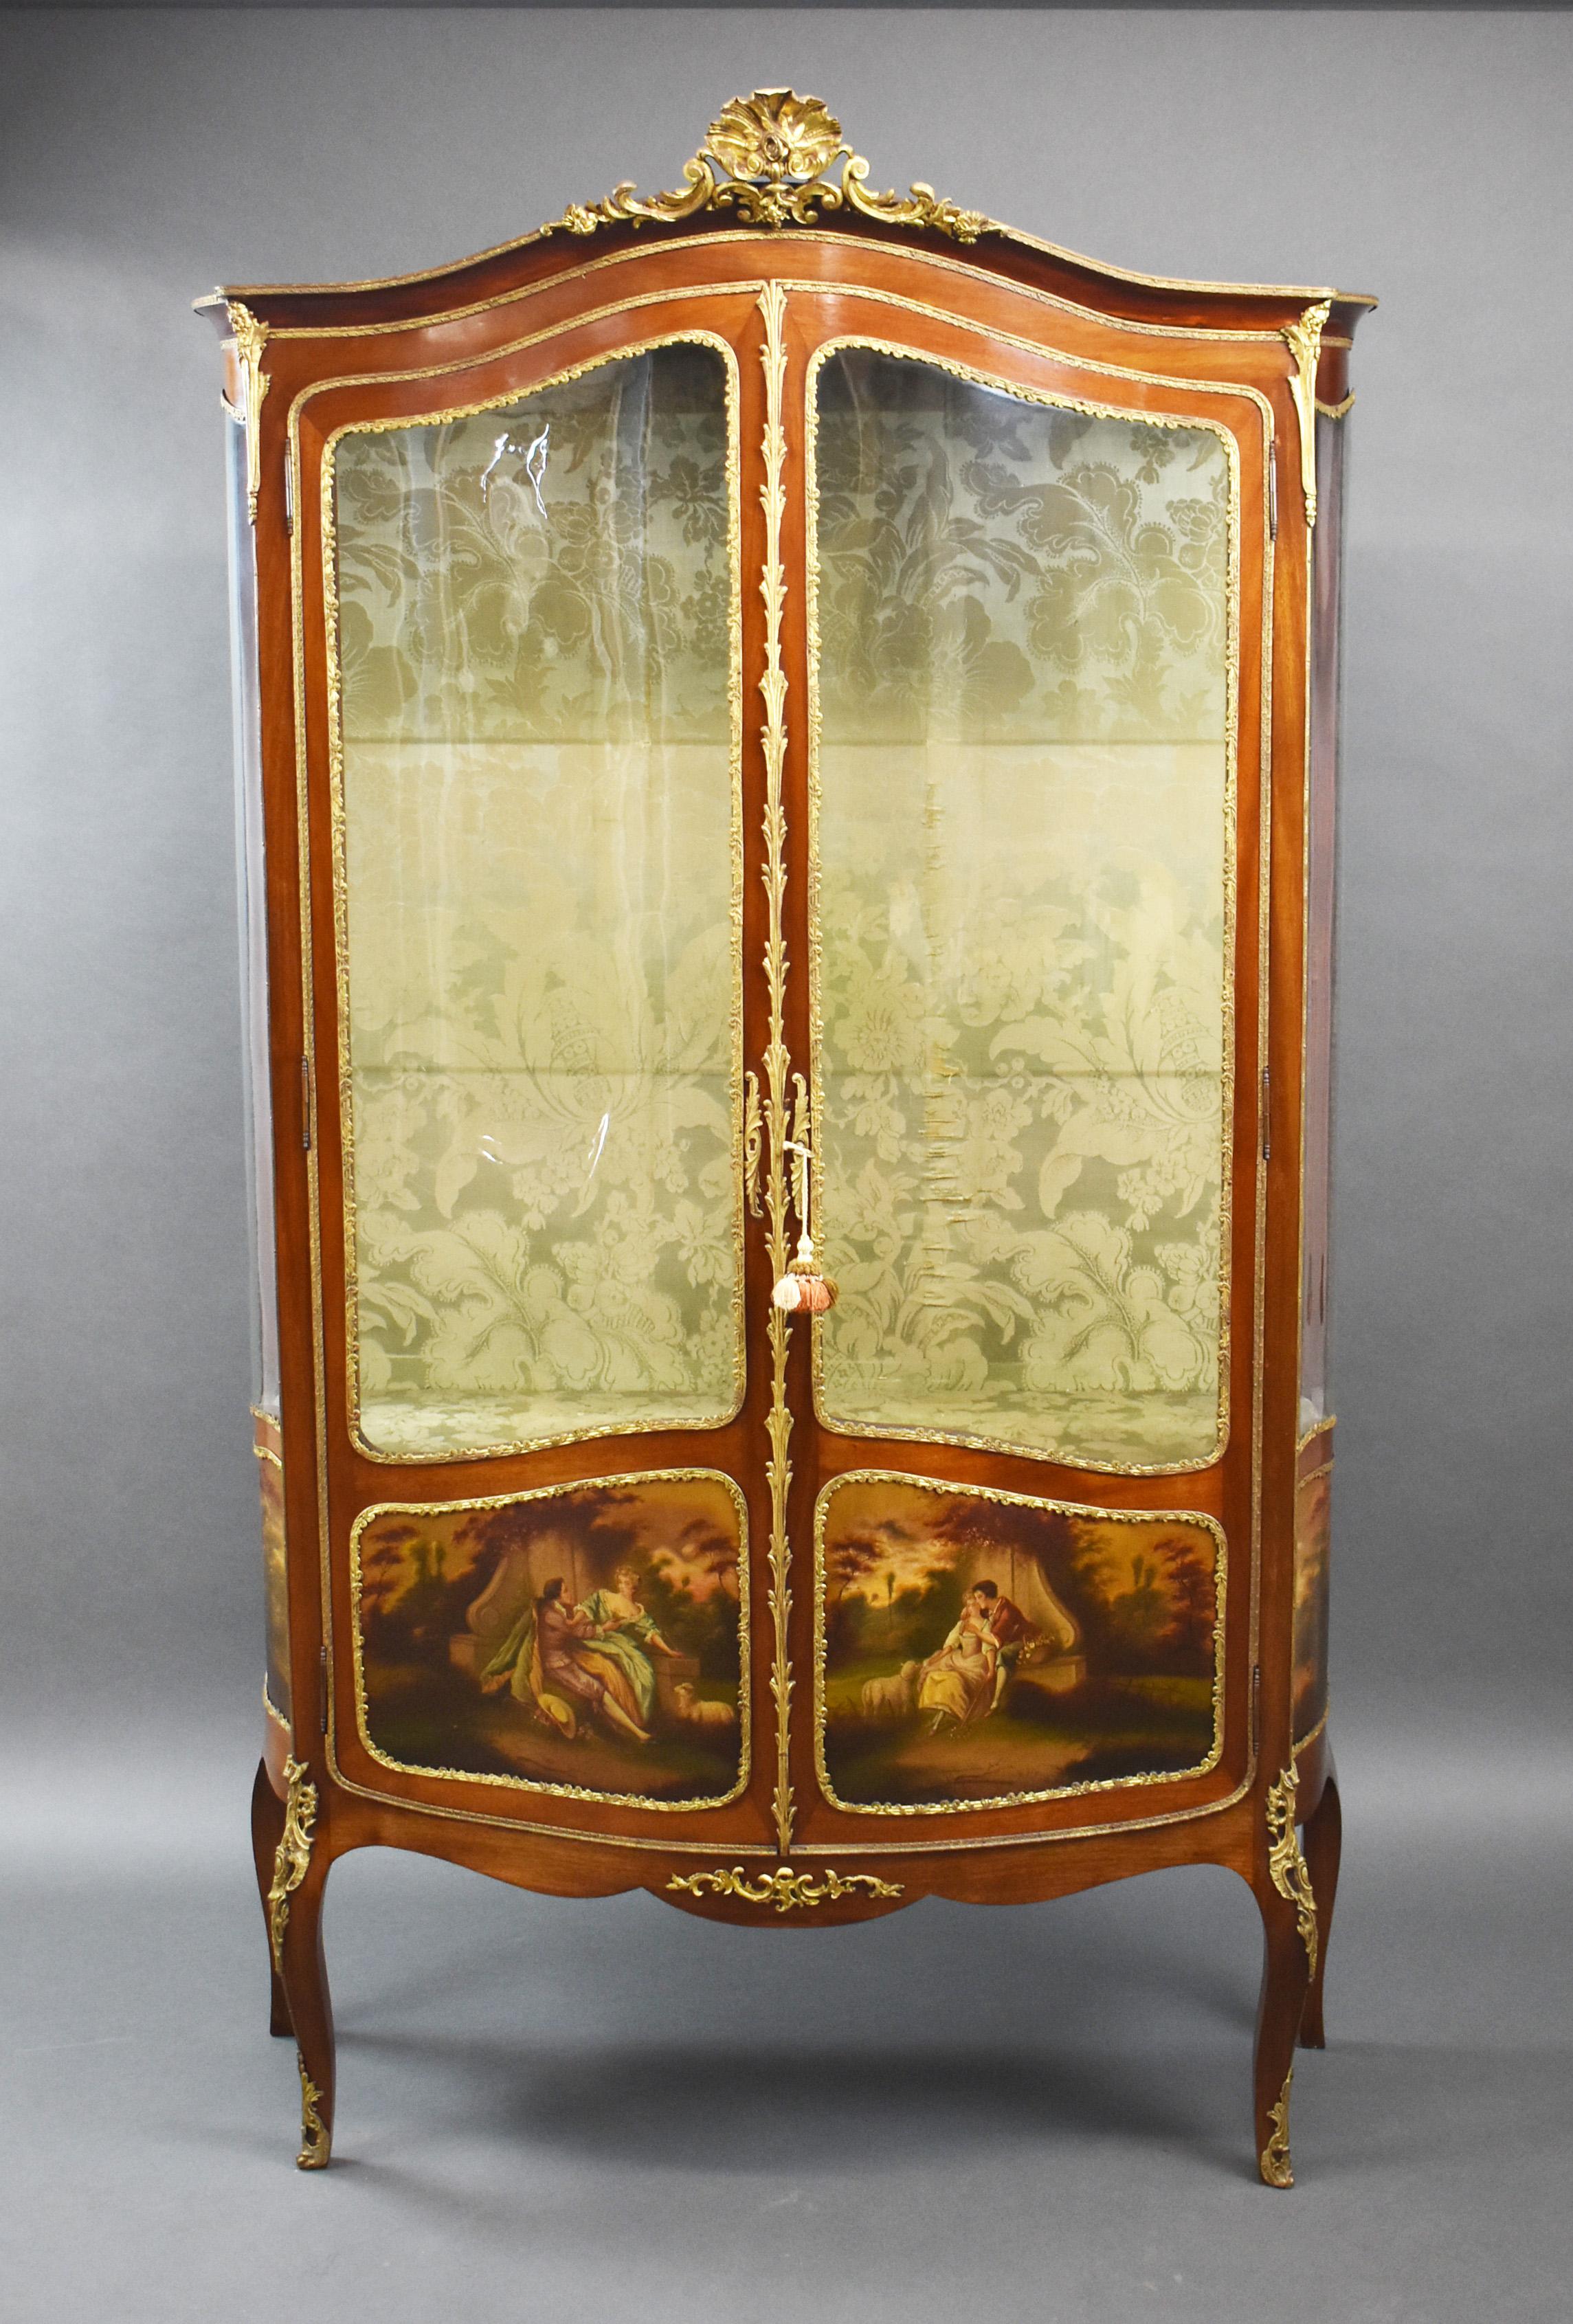 For sale is a good quality 19th century French Vernis Martin serpentine display cabinet. Having an ornate ormulu shell motif to the top, above two glazed doors, enclosing two glass shelves. Below this, each door has two finely painted panels, with a